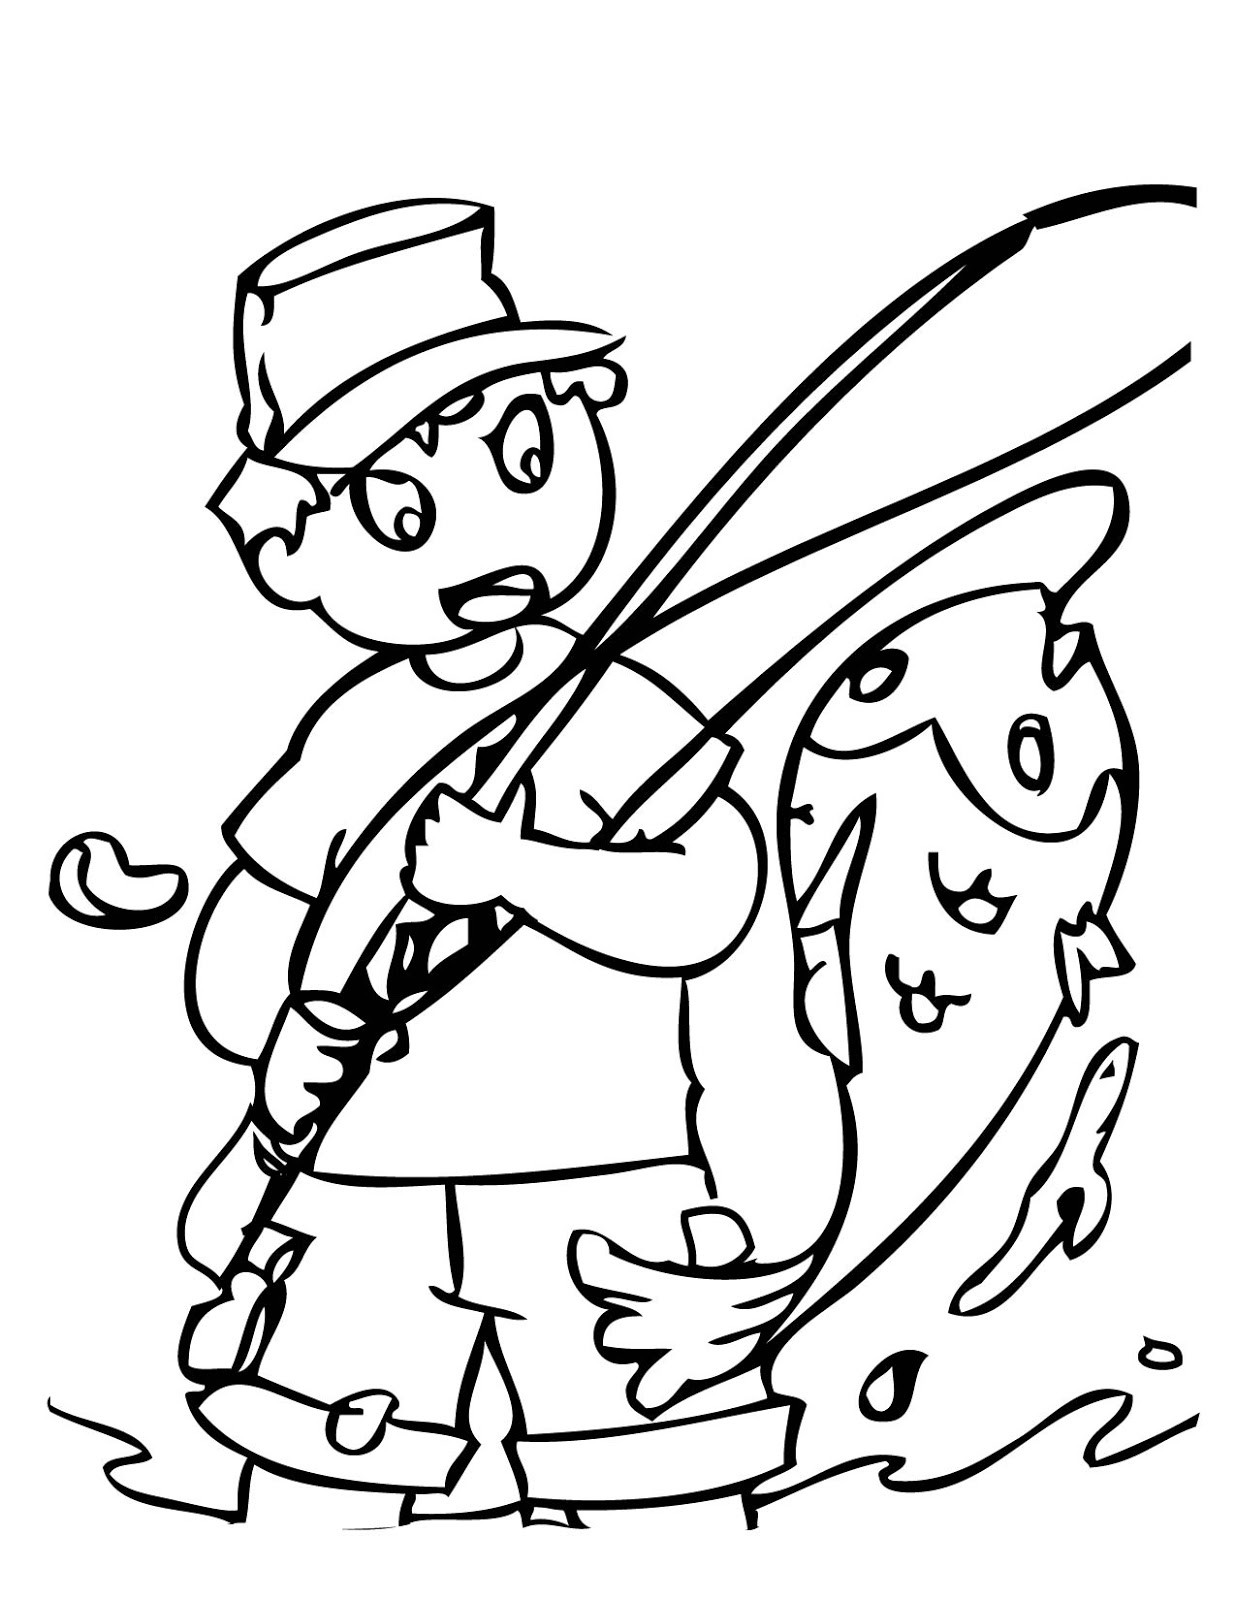 Coloring Pages For Kids Fish
 Moodus Sportsmen s Club